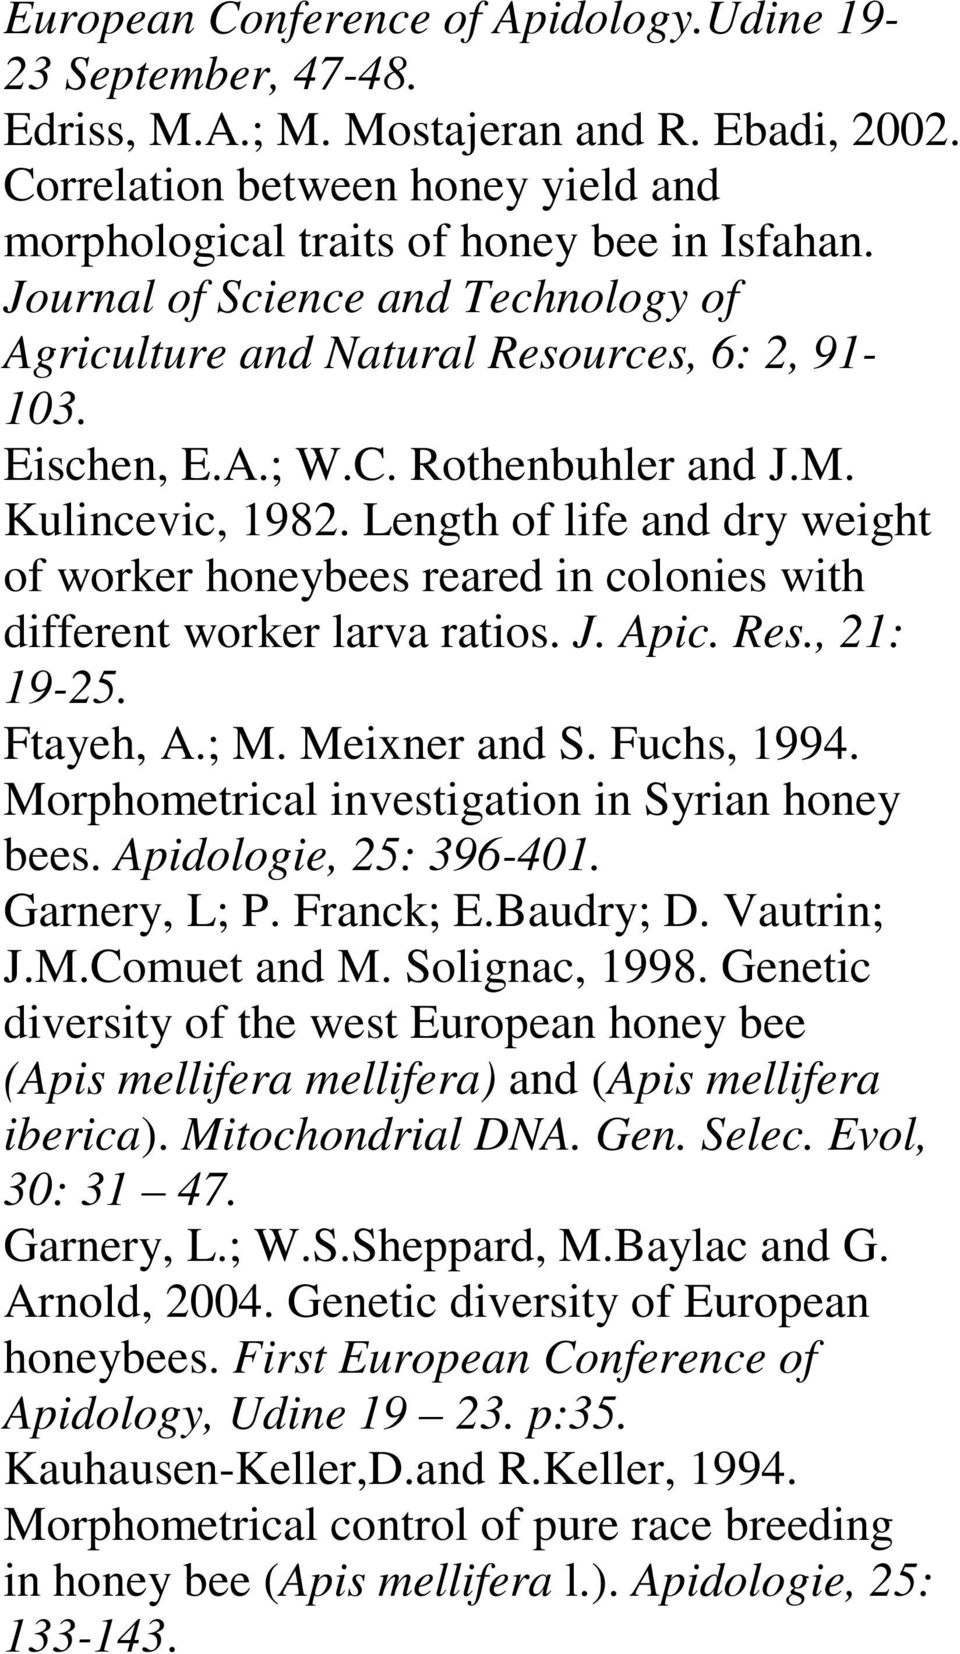 Length of life and dry weight of worker honeybees reared in colonies with different worker larva ratios. J. Apic. Res., 21: 19-25. Ftayeh, A.; M. Meixner and S. Fuchs, 1994.